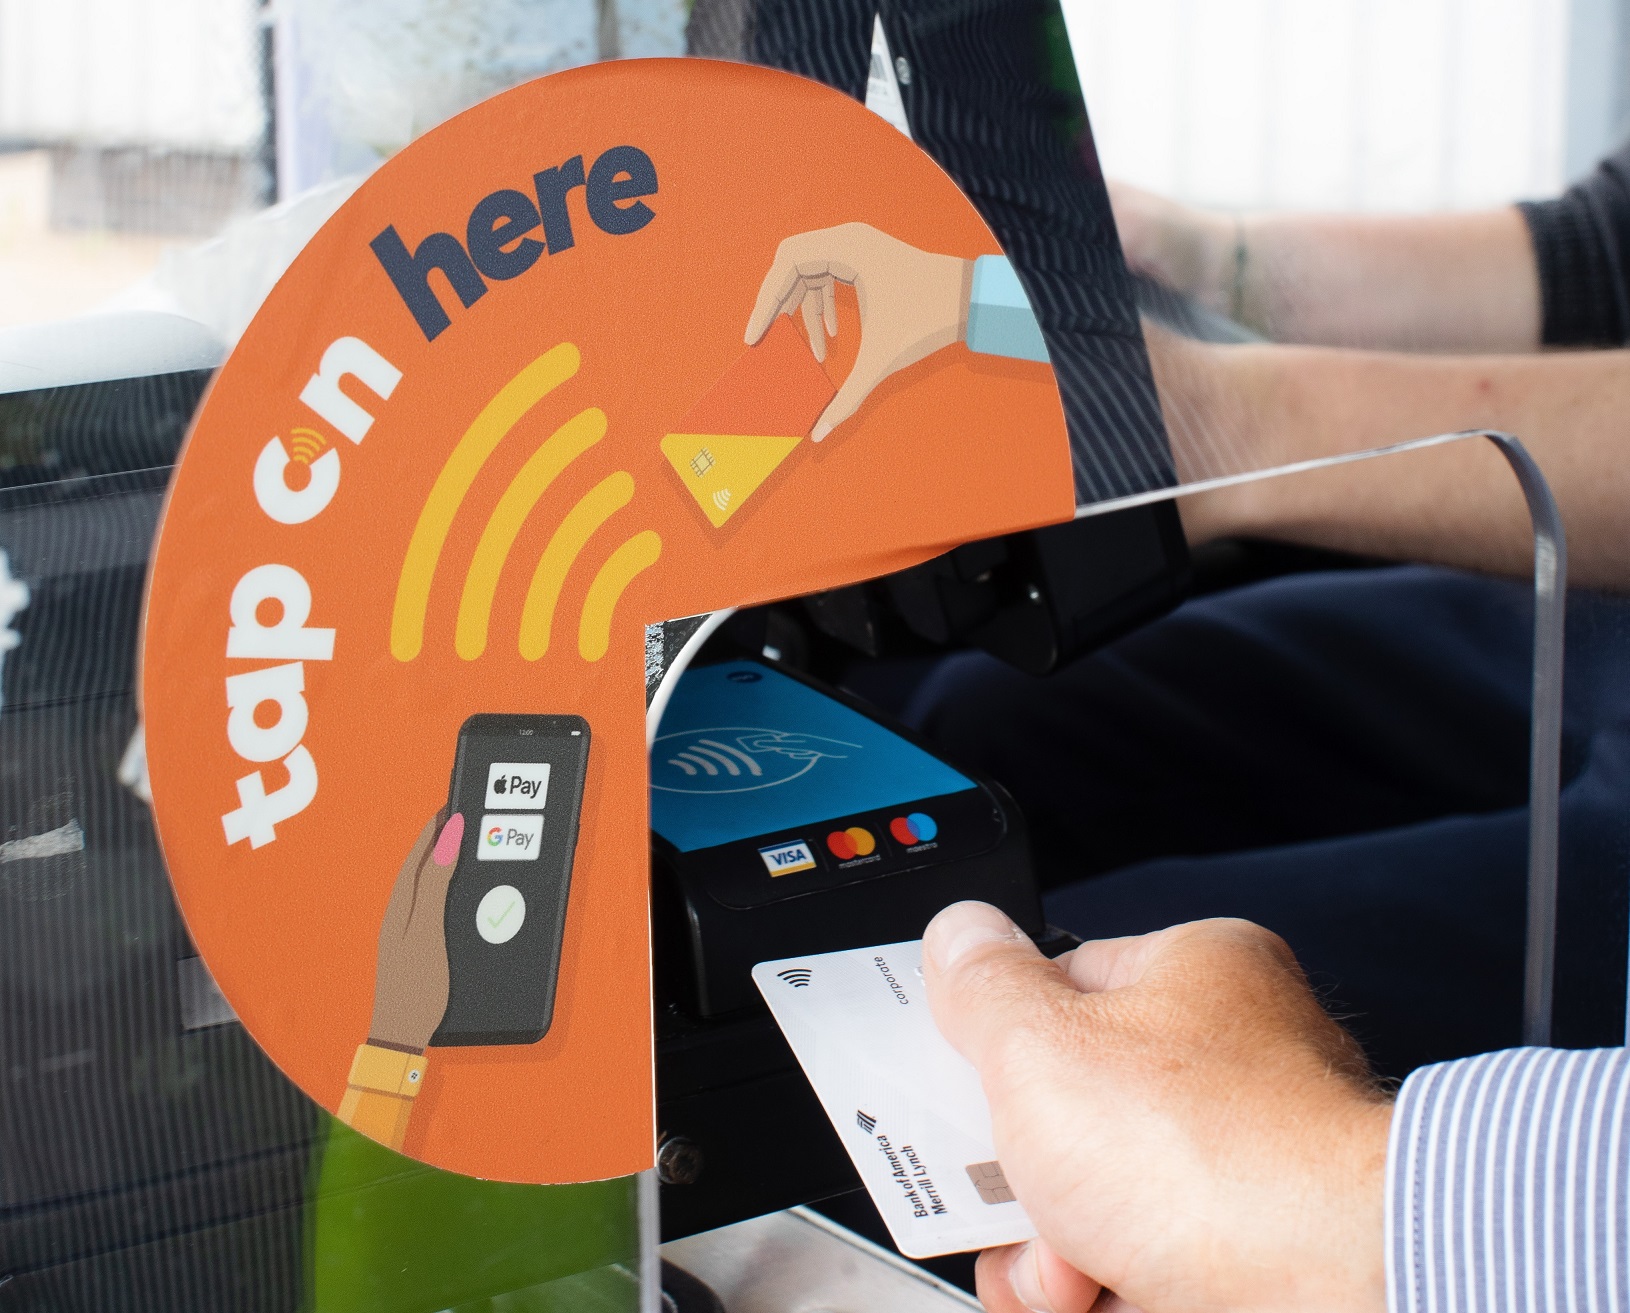 Leicester multi operator capped contactless payment scheme sees success